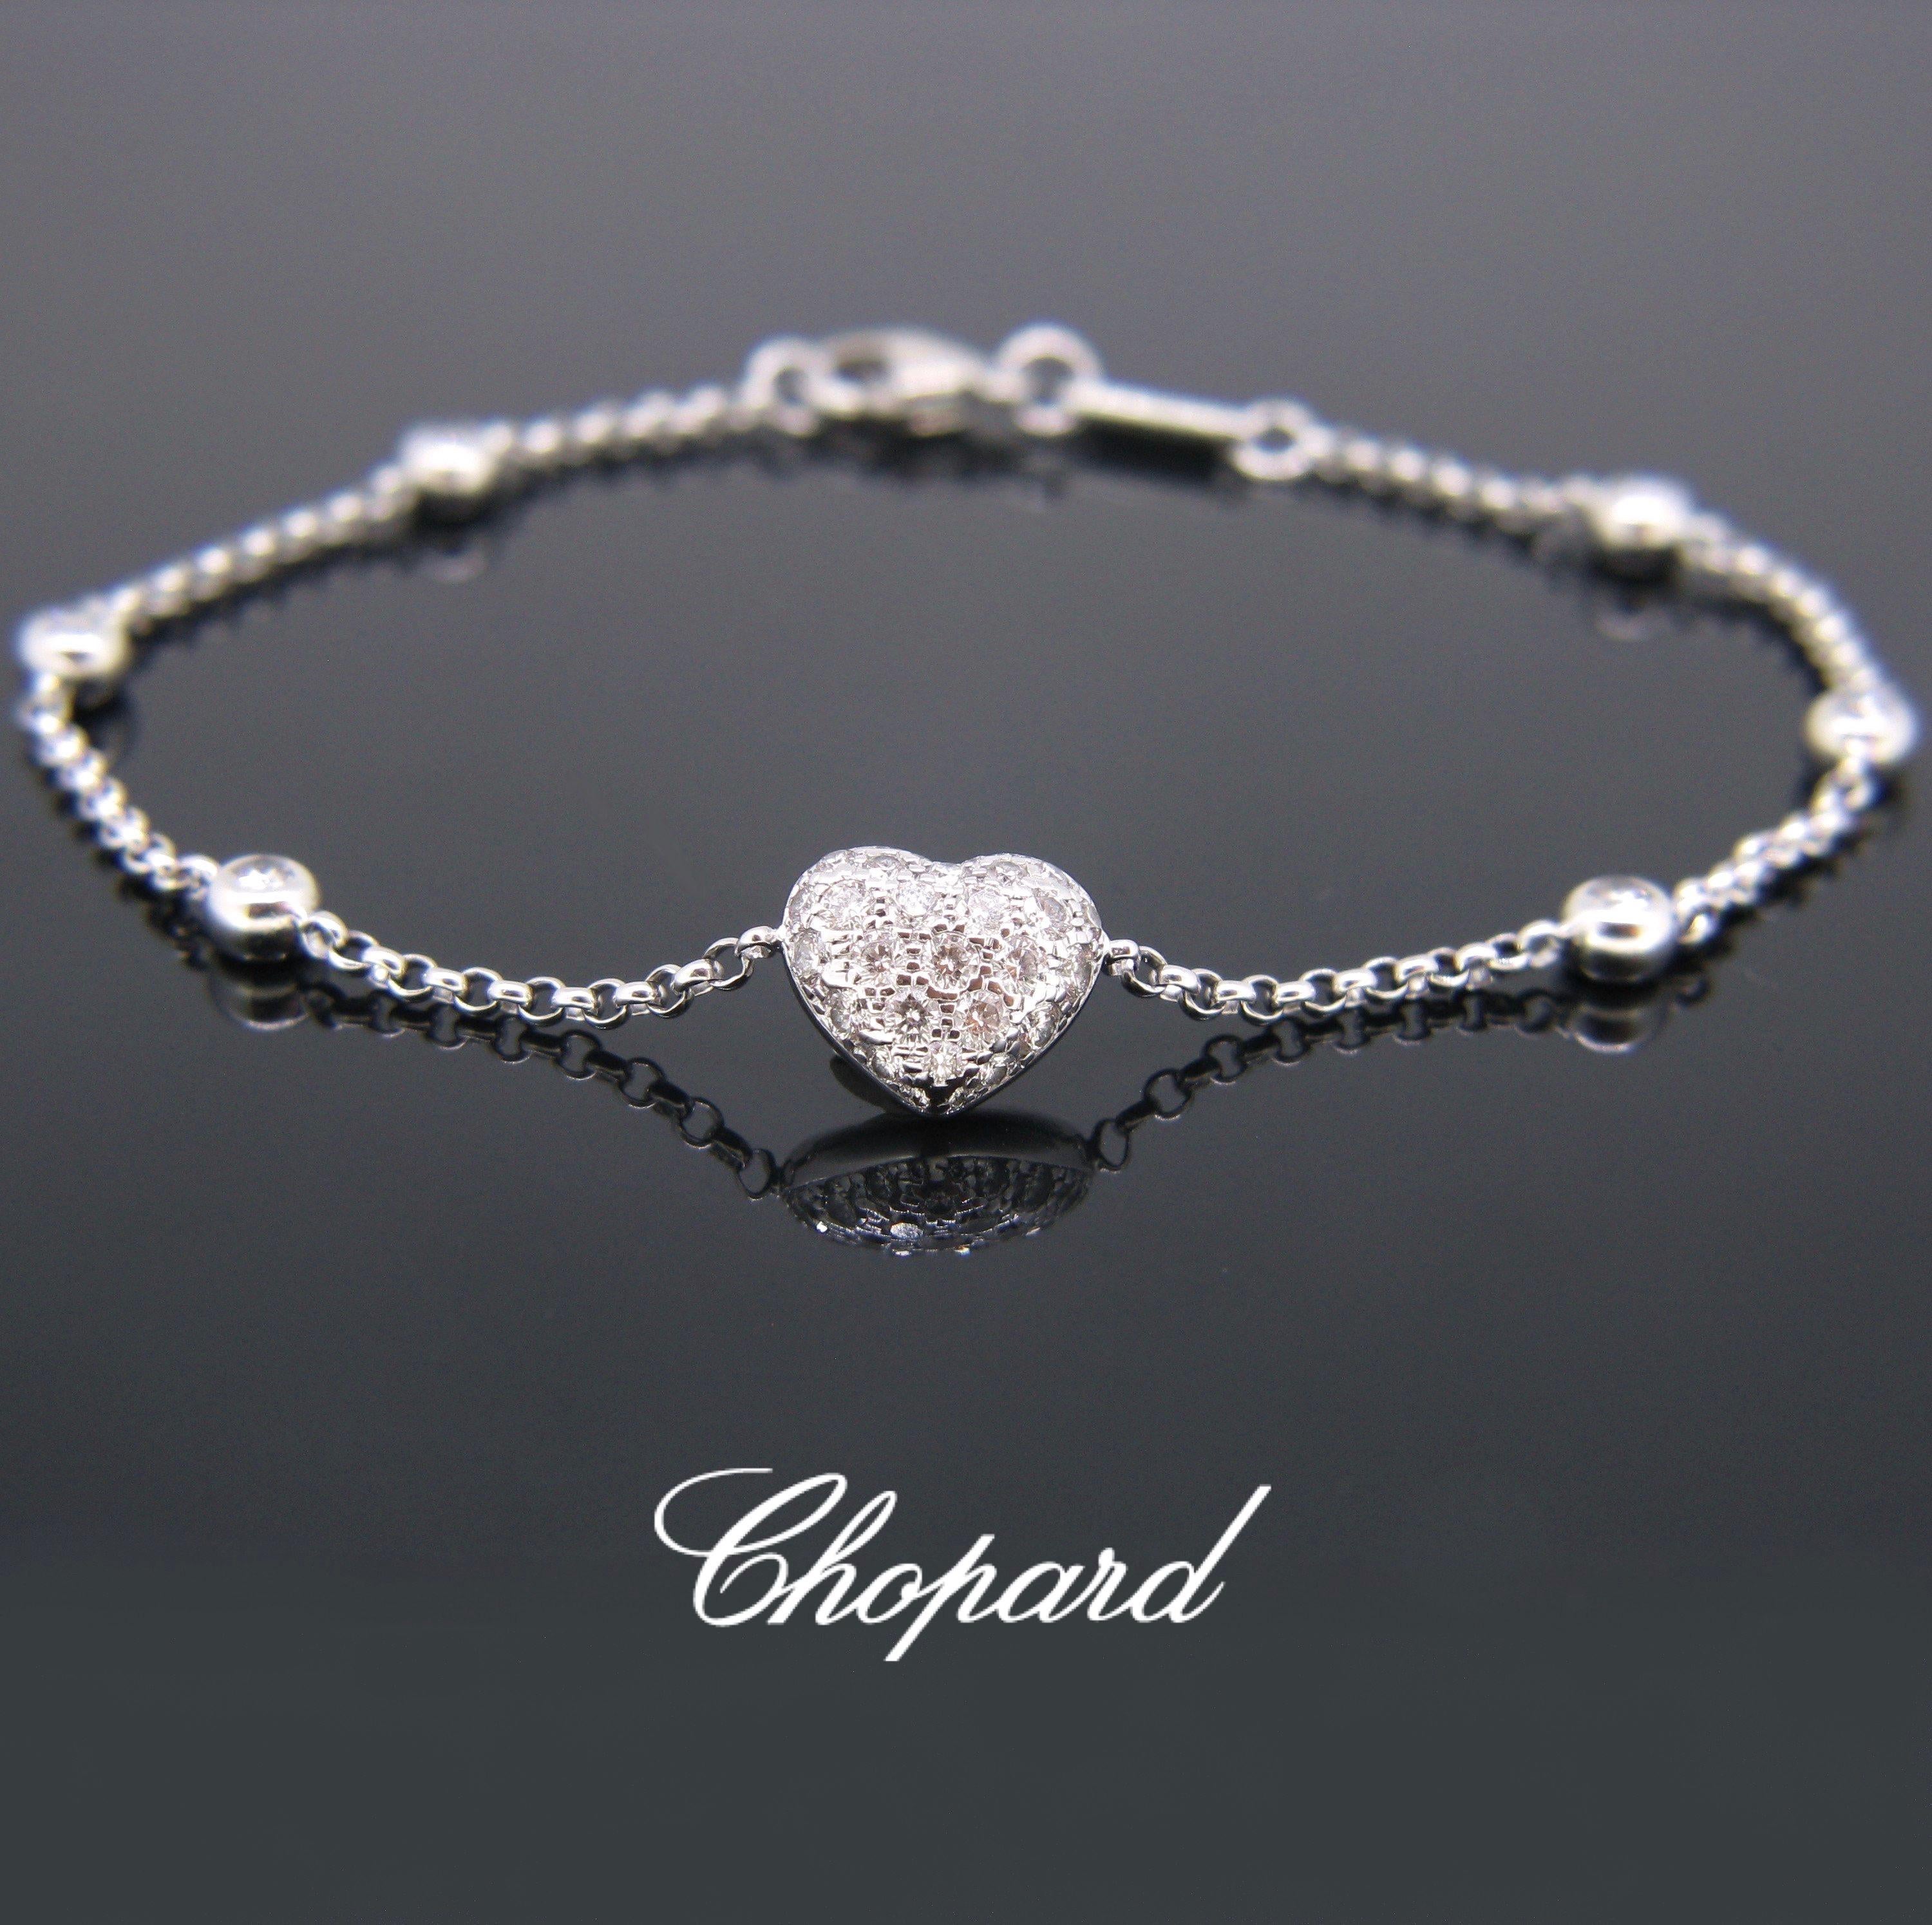 This ravishing bracelet is signed Chopard. It is made in 18kt white gold. The heart in the middle is set with 29 round cut diamonds and there are 6 diamonds on the chain of the bracelet. The total diamond carat weight is around 1ct. The bracelet can